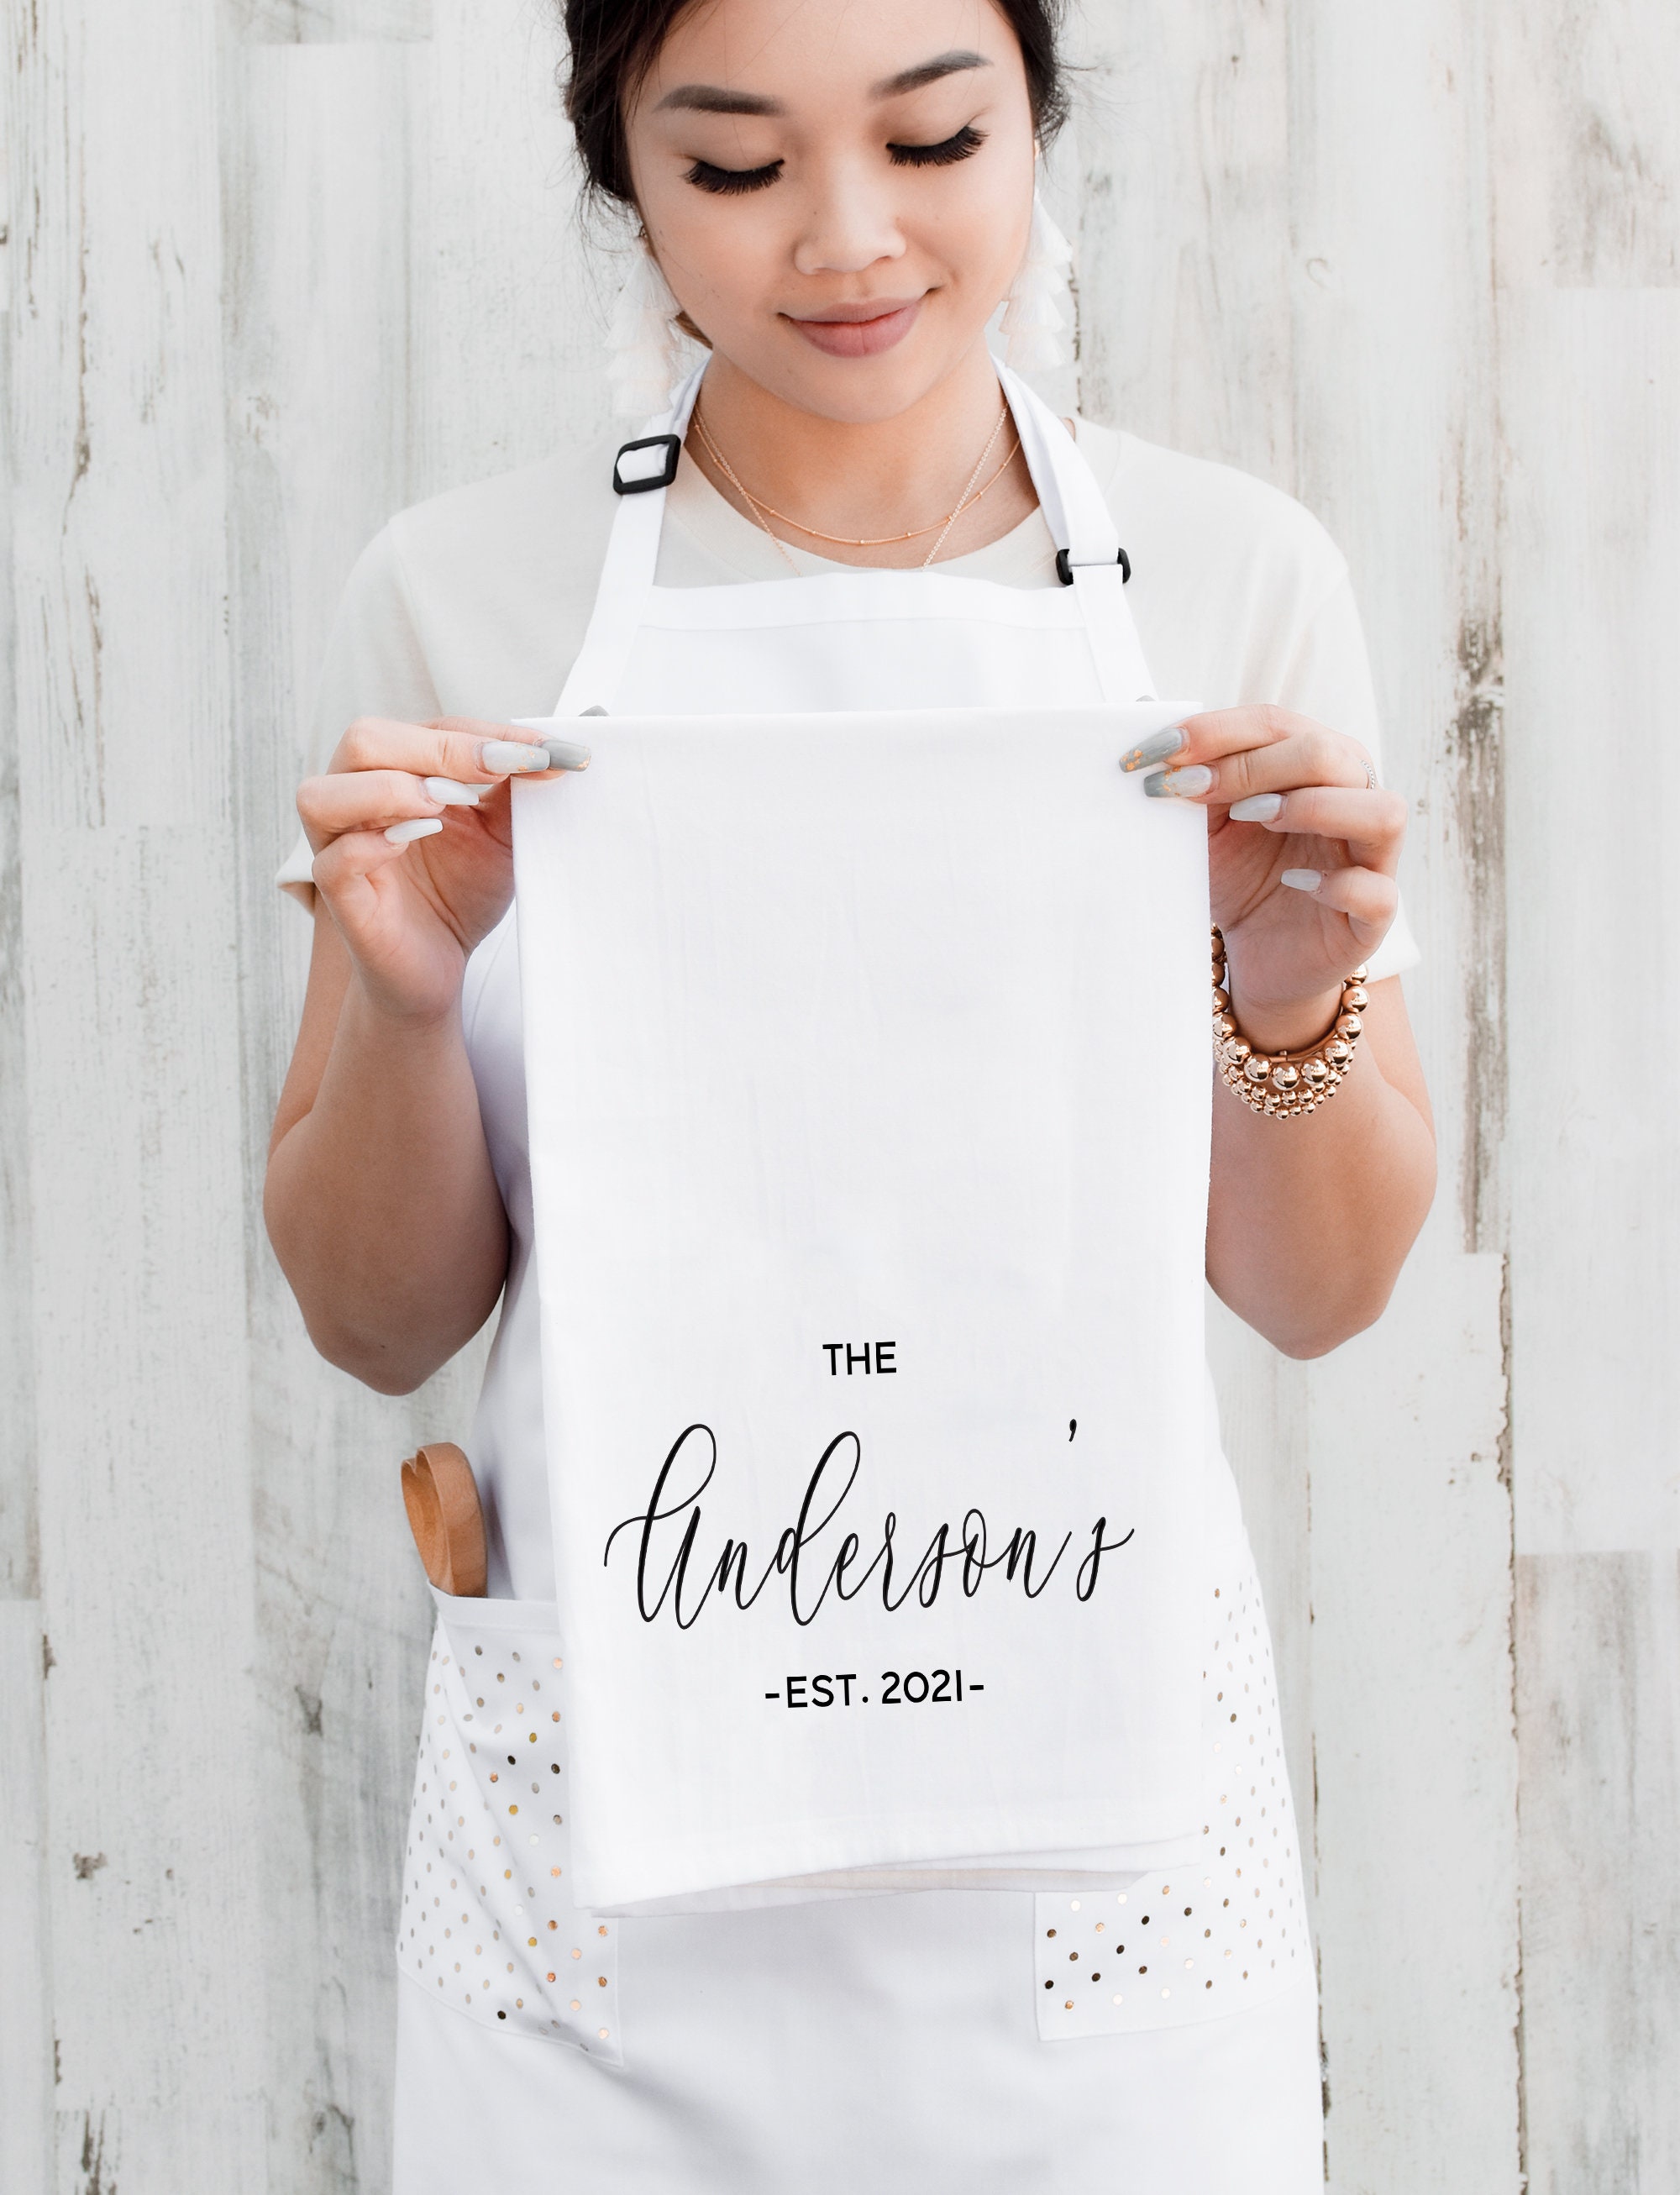 Design Your Own Custom Tea Towel, Personalized Kitchen Towel, Housewarming  Gifts, Closing Gift, First Home, Hand Towels, Flour Sack Towels 